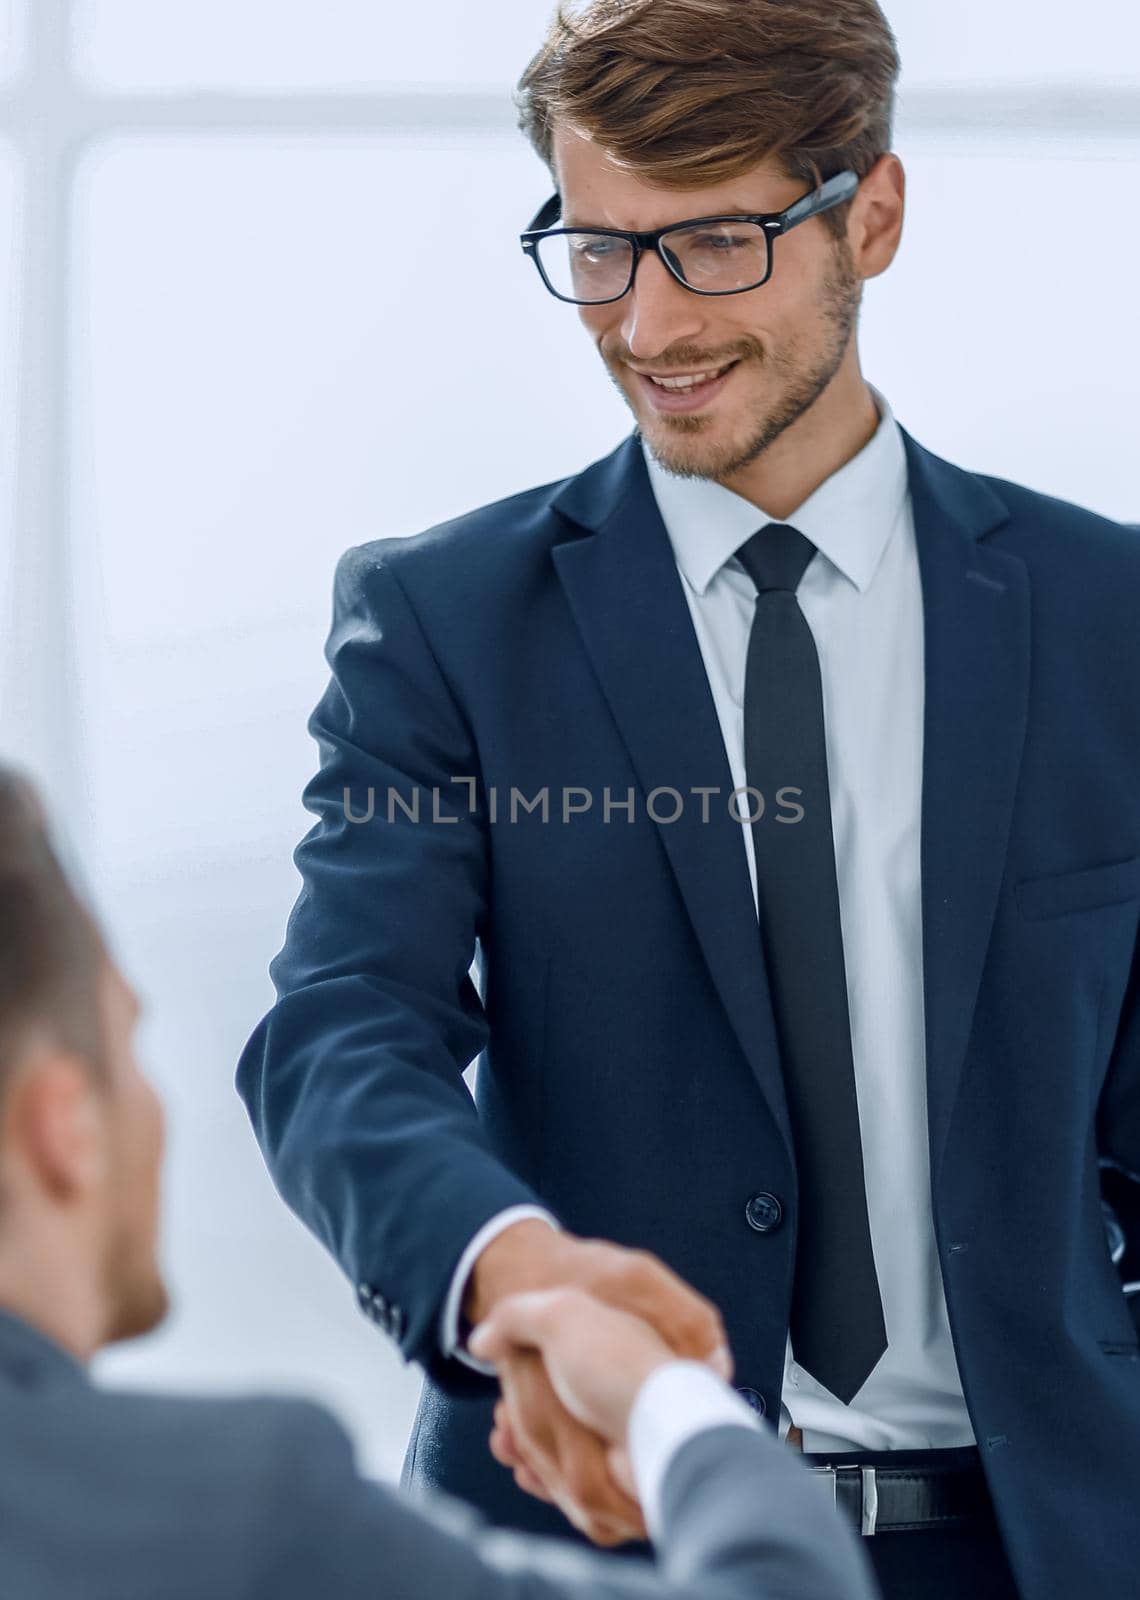 young businessman with glasses greets his colleague with a handshake